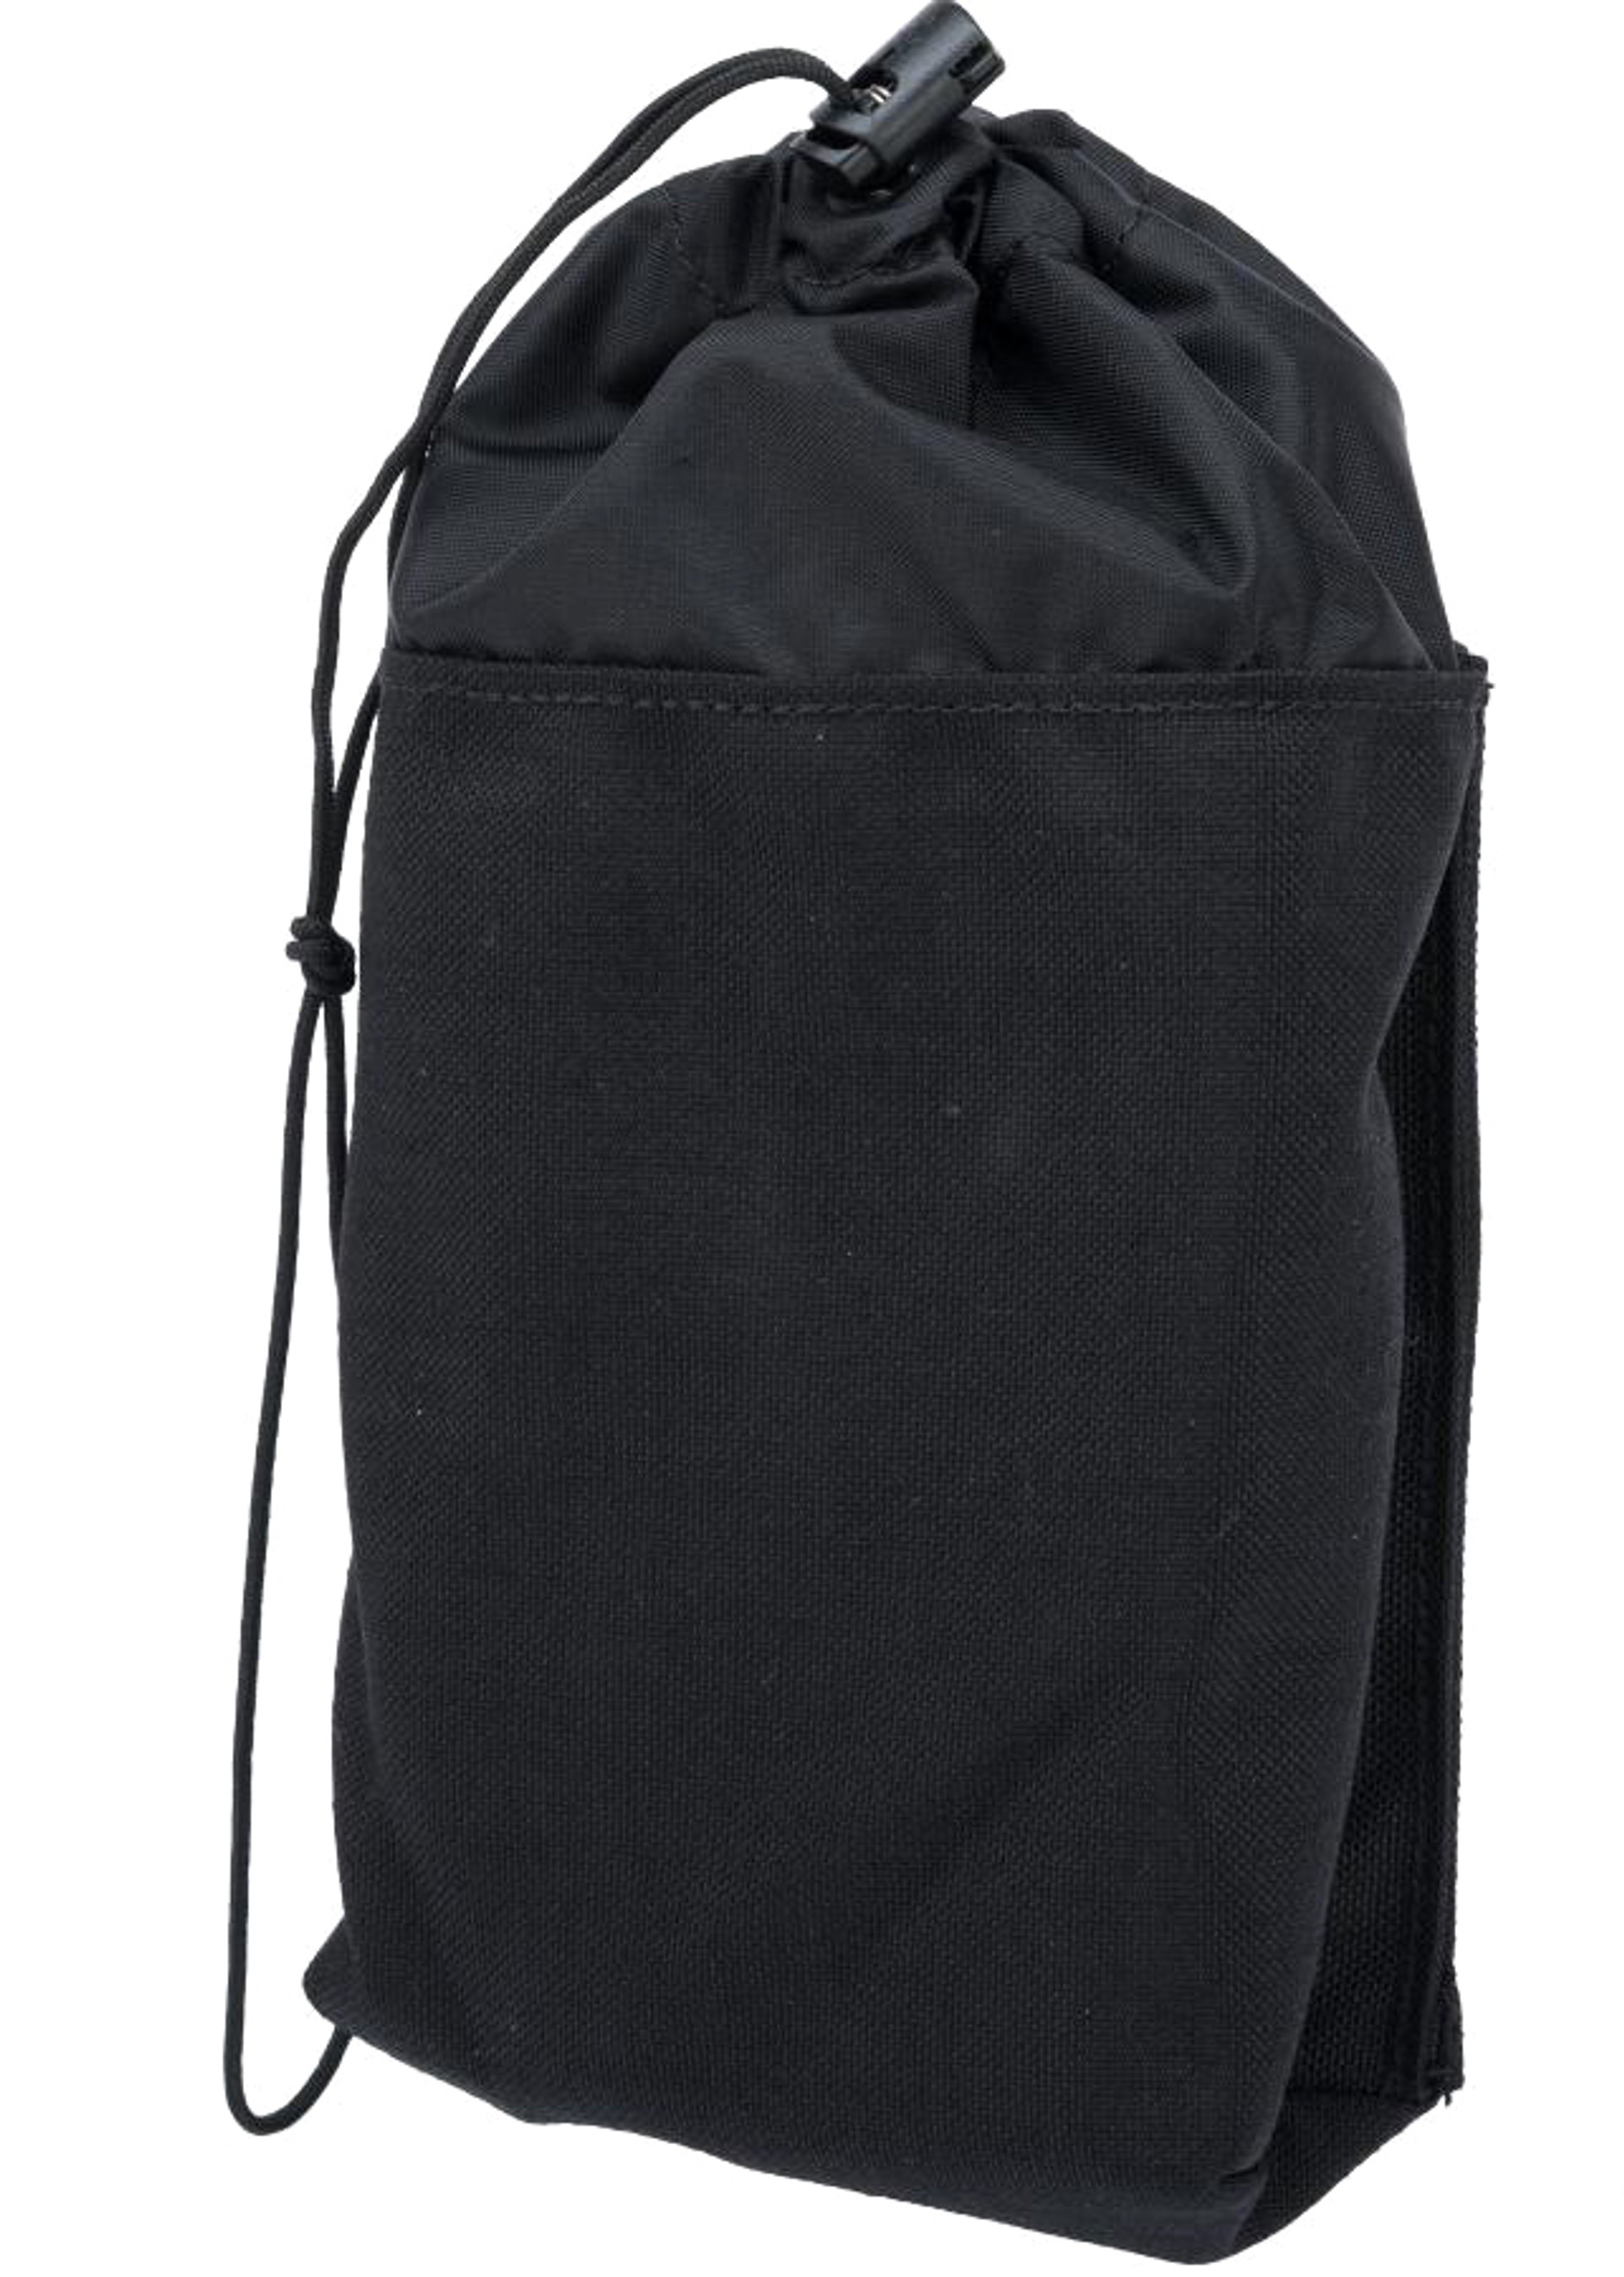 LBX Power Adapter Carrying Pouch